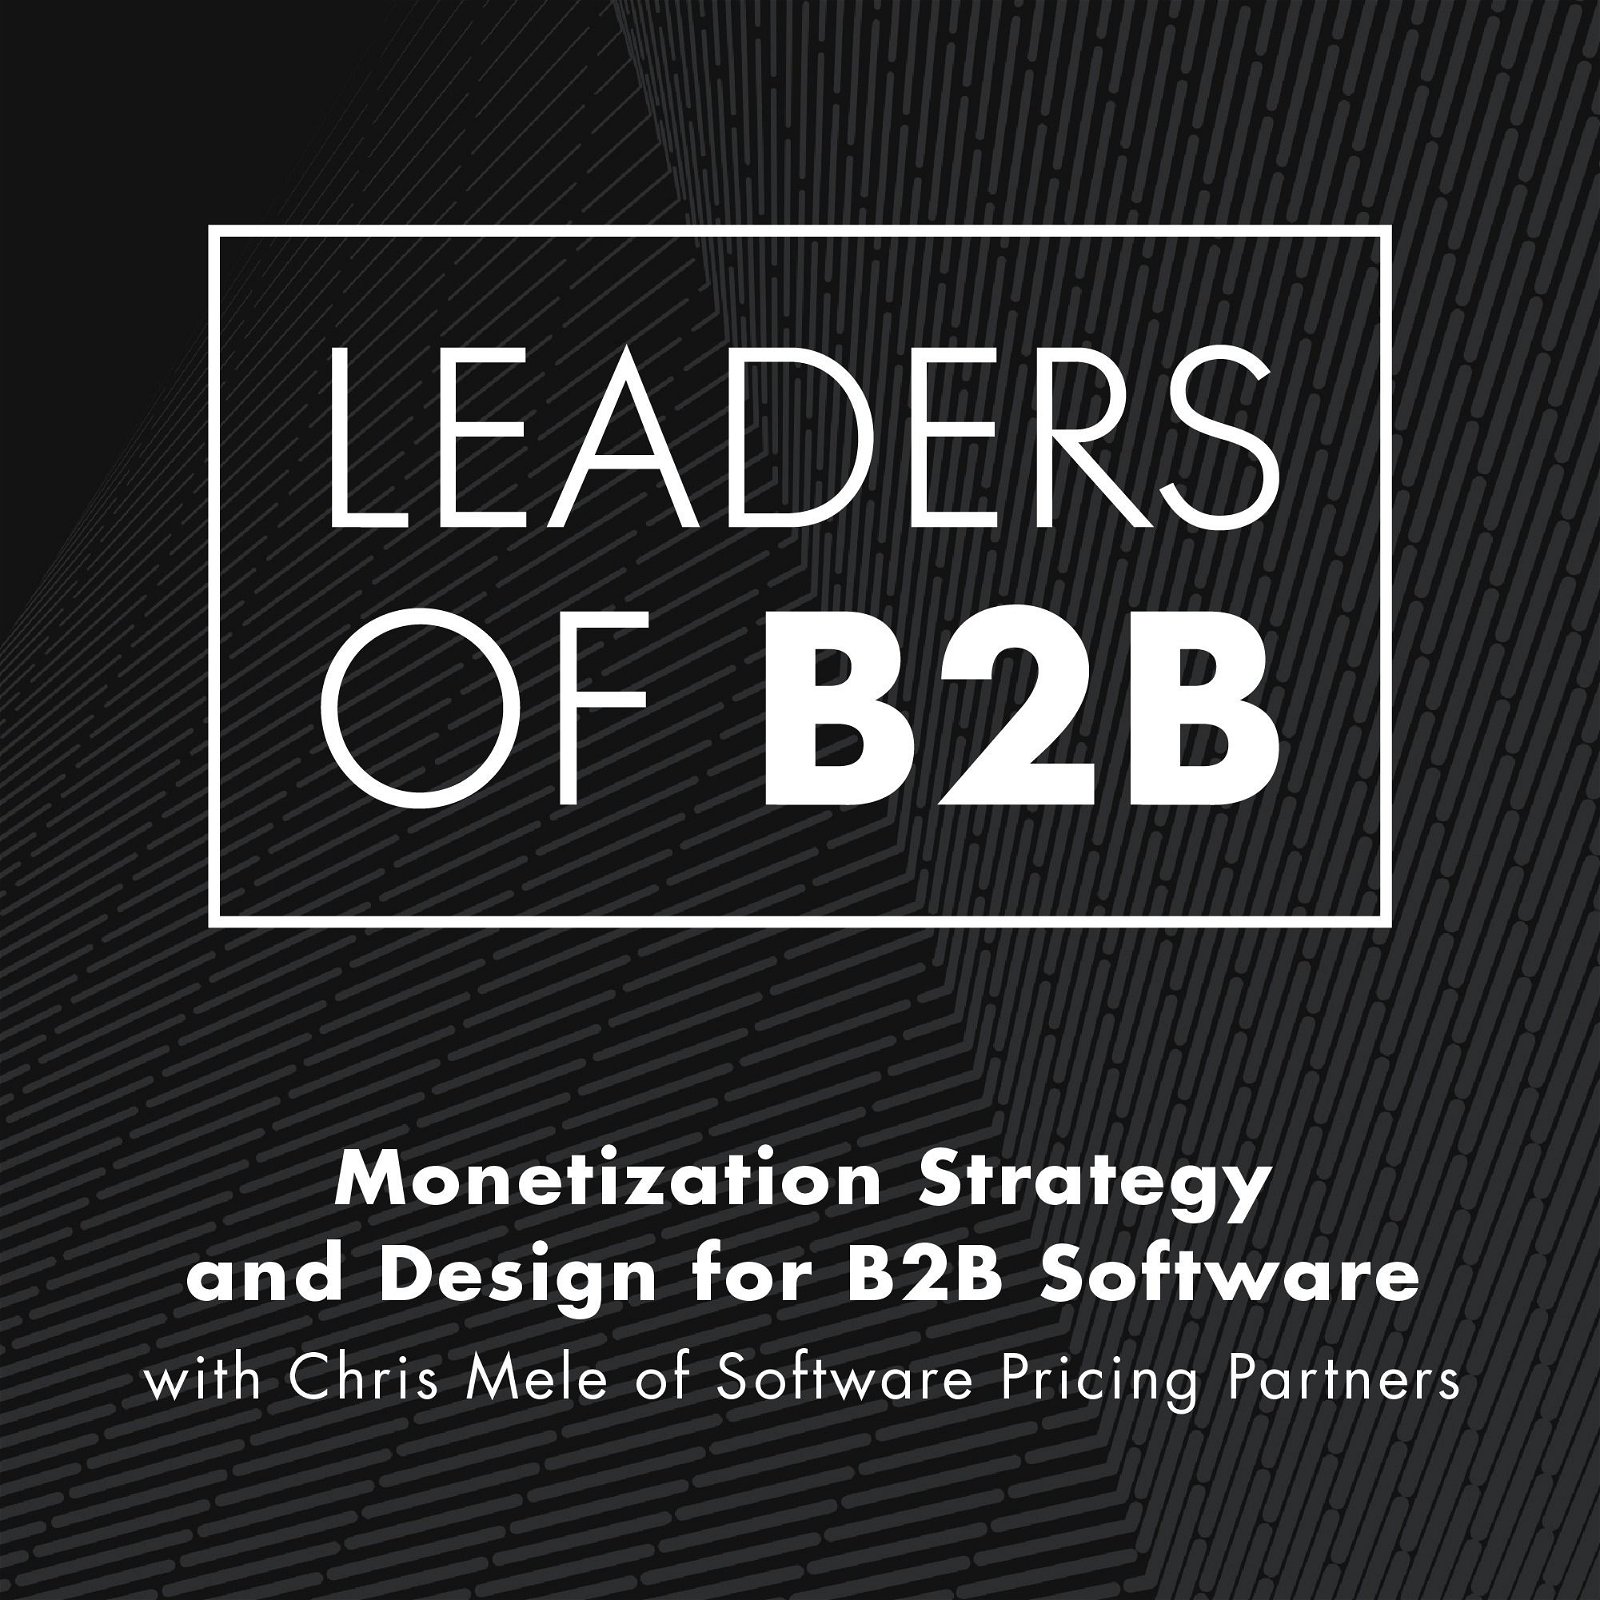 Monetization Strategy and Design for B2B Software with Chris Mele of Software Pricing Partners